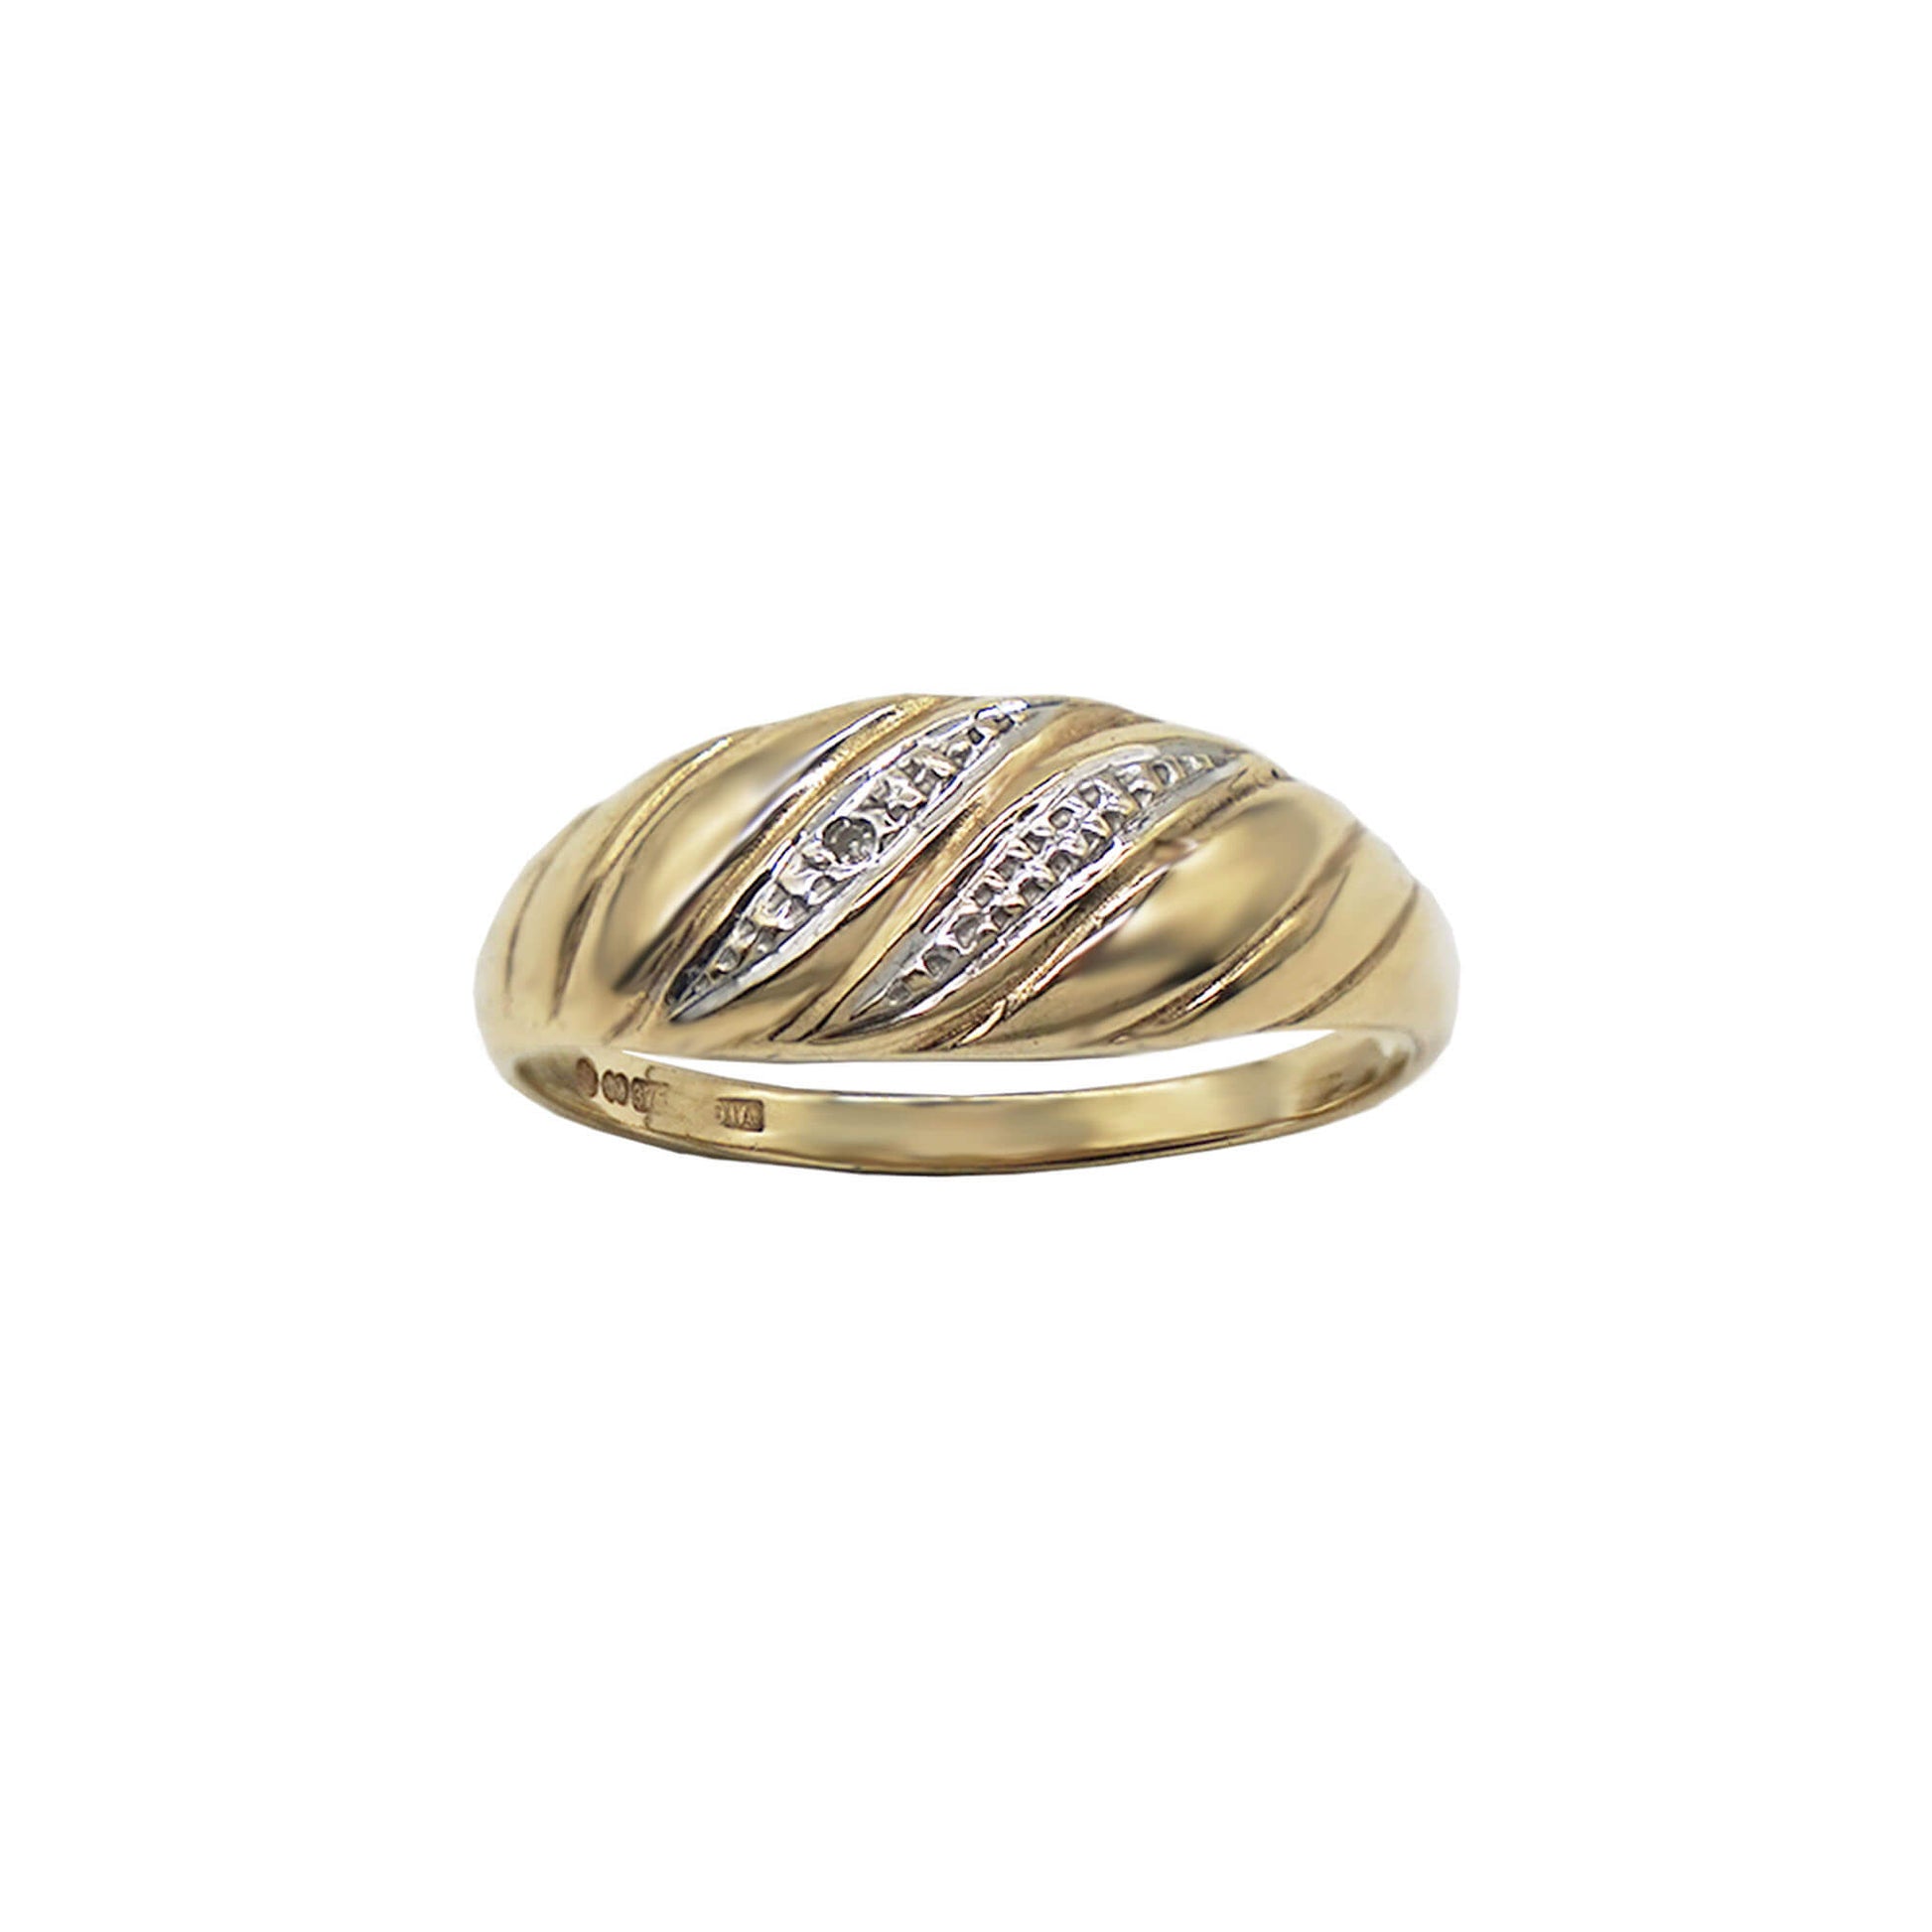 front vire vintage 9k gold diamond croissant tyle ring- hallmarks visible on inner band.